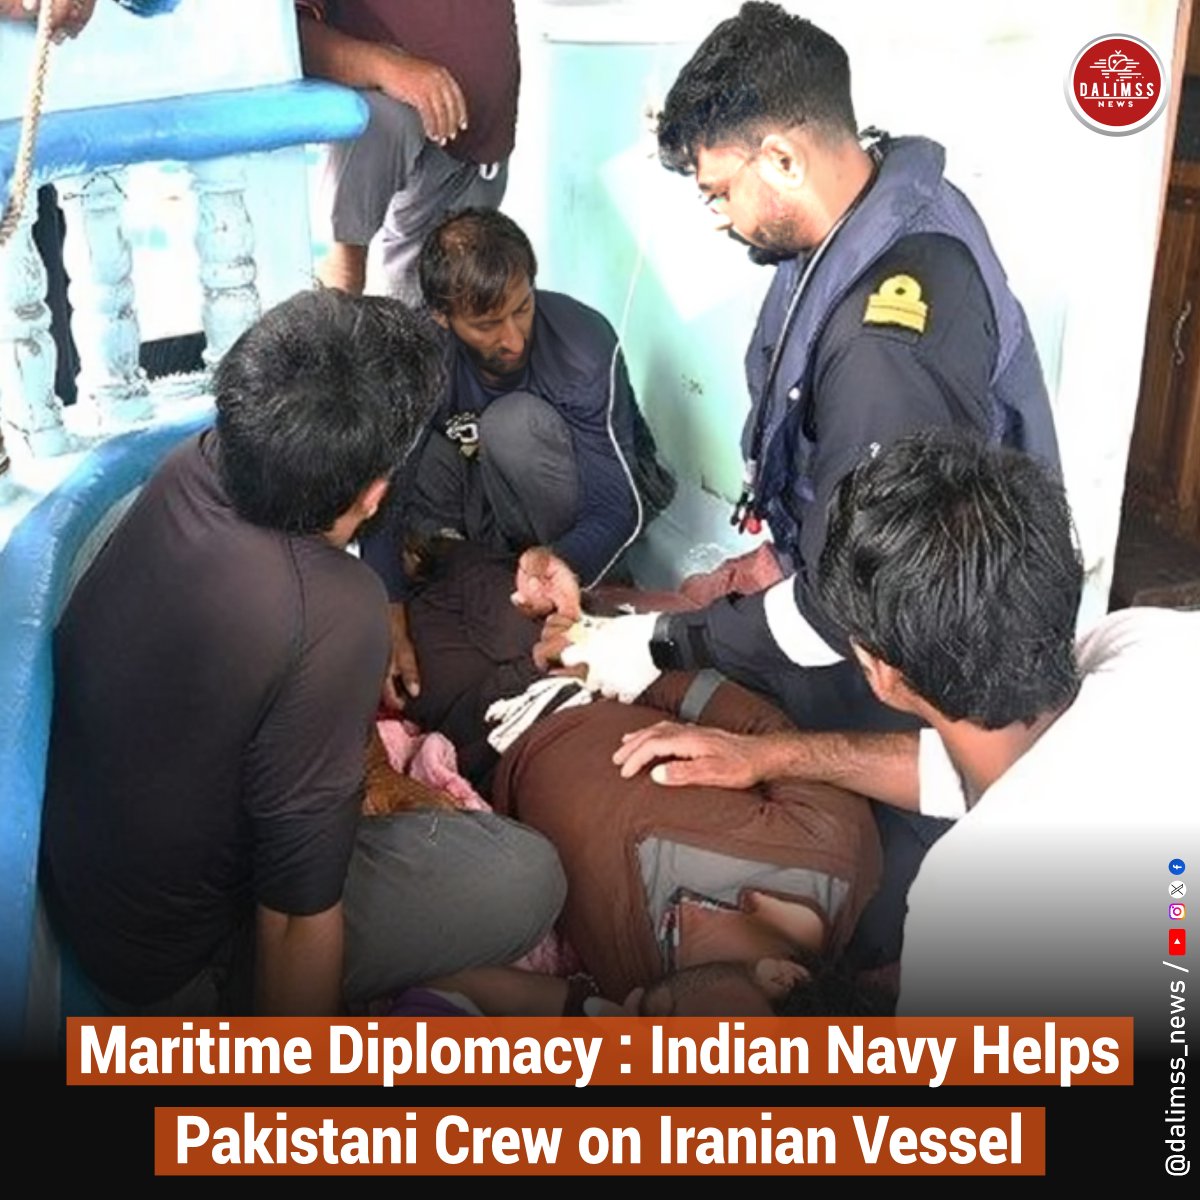 An Indian warship extends assistance to a Pakistani crew aboard an Iranian fishing vessel. This act of cooperation transcends borders, showcasing humanitarian efforts amid maritime operations.
#INSSumedha #Pakistan #India #Iranianfishingvessel #ArabianSea